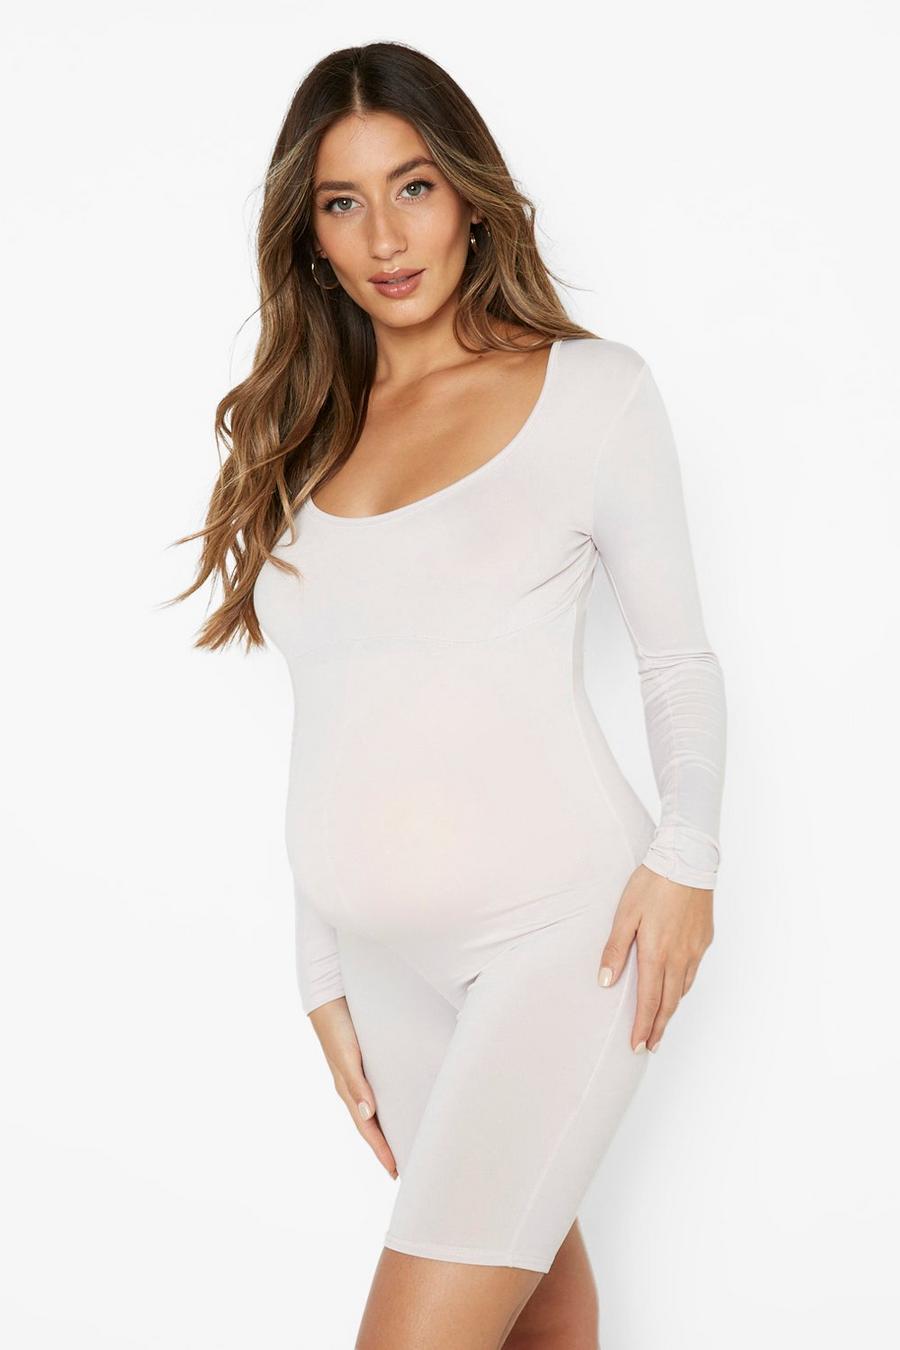 Maternity Contour Fitted Unitard